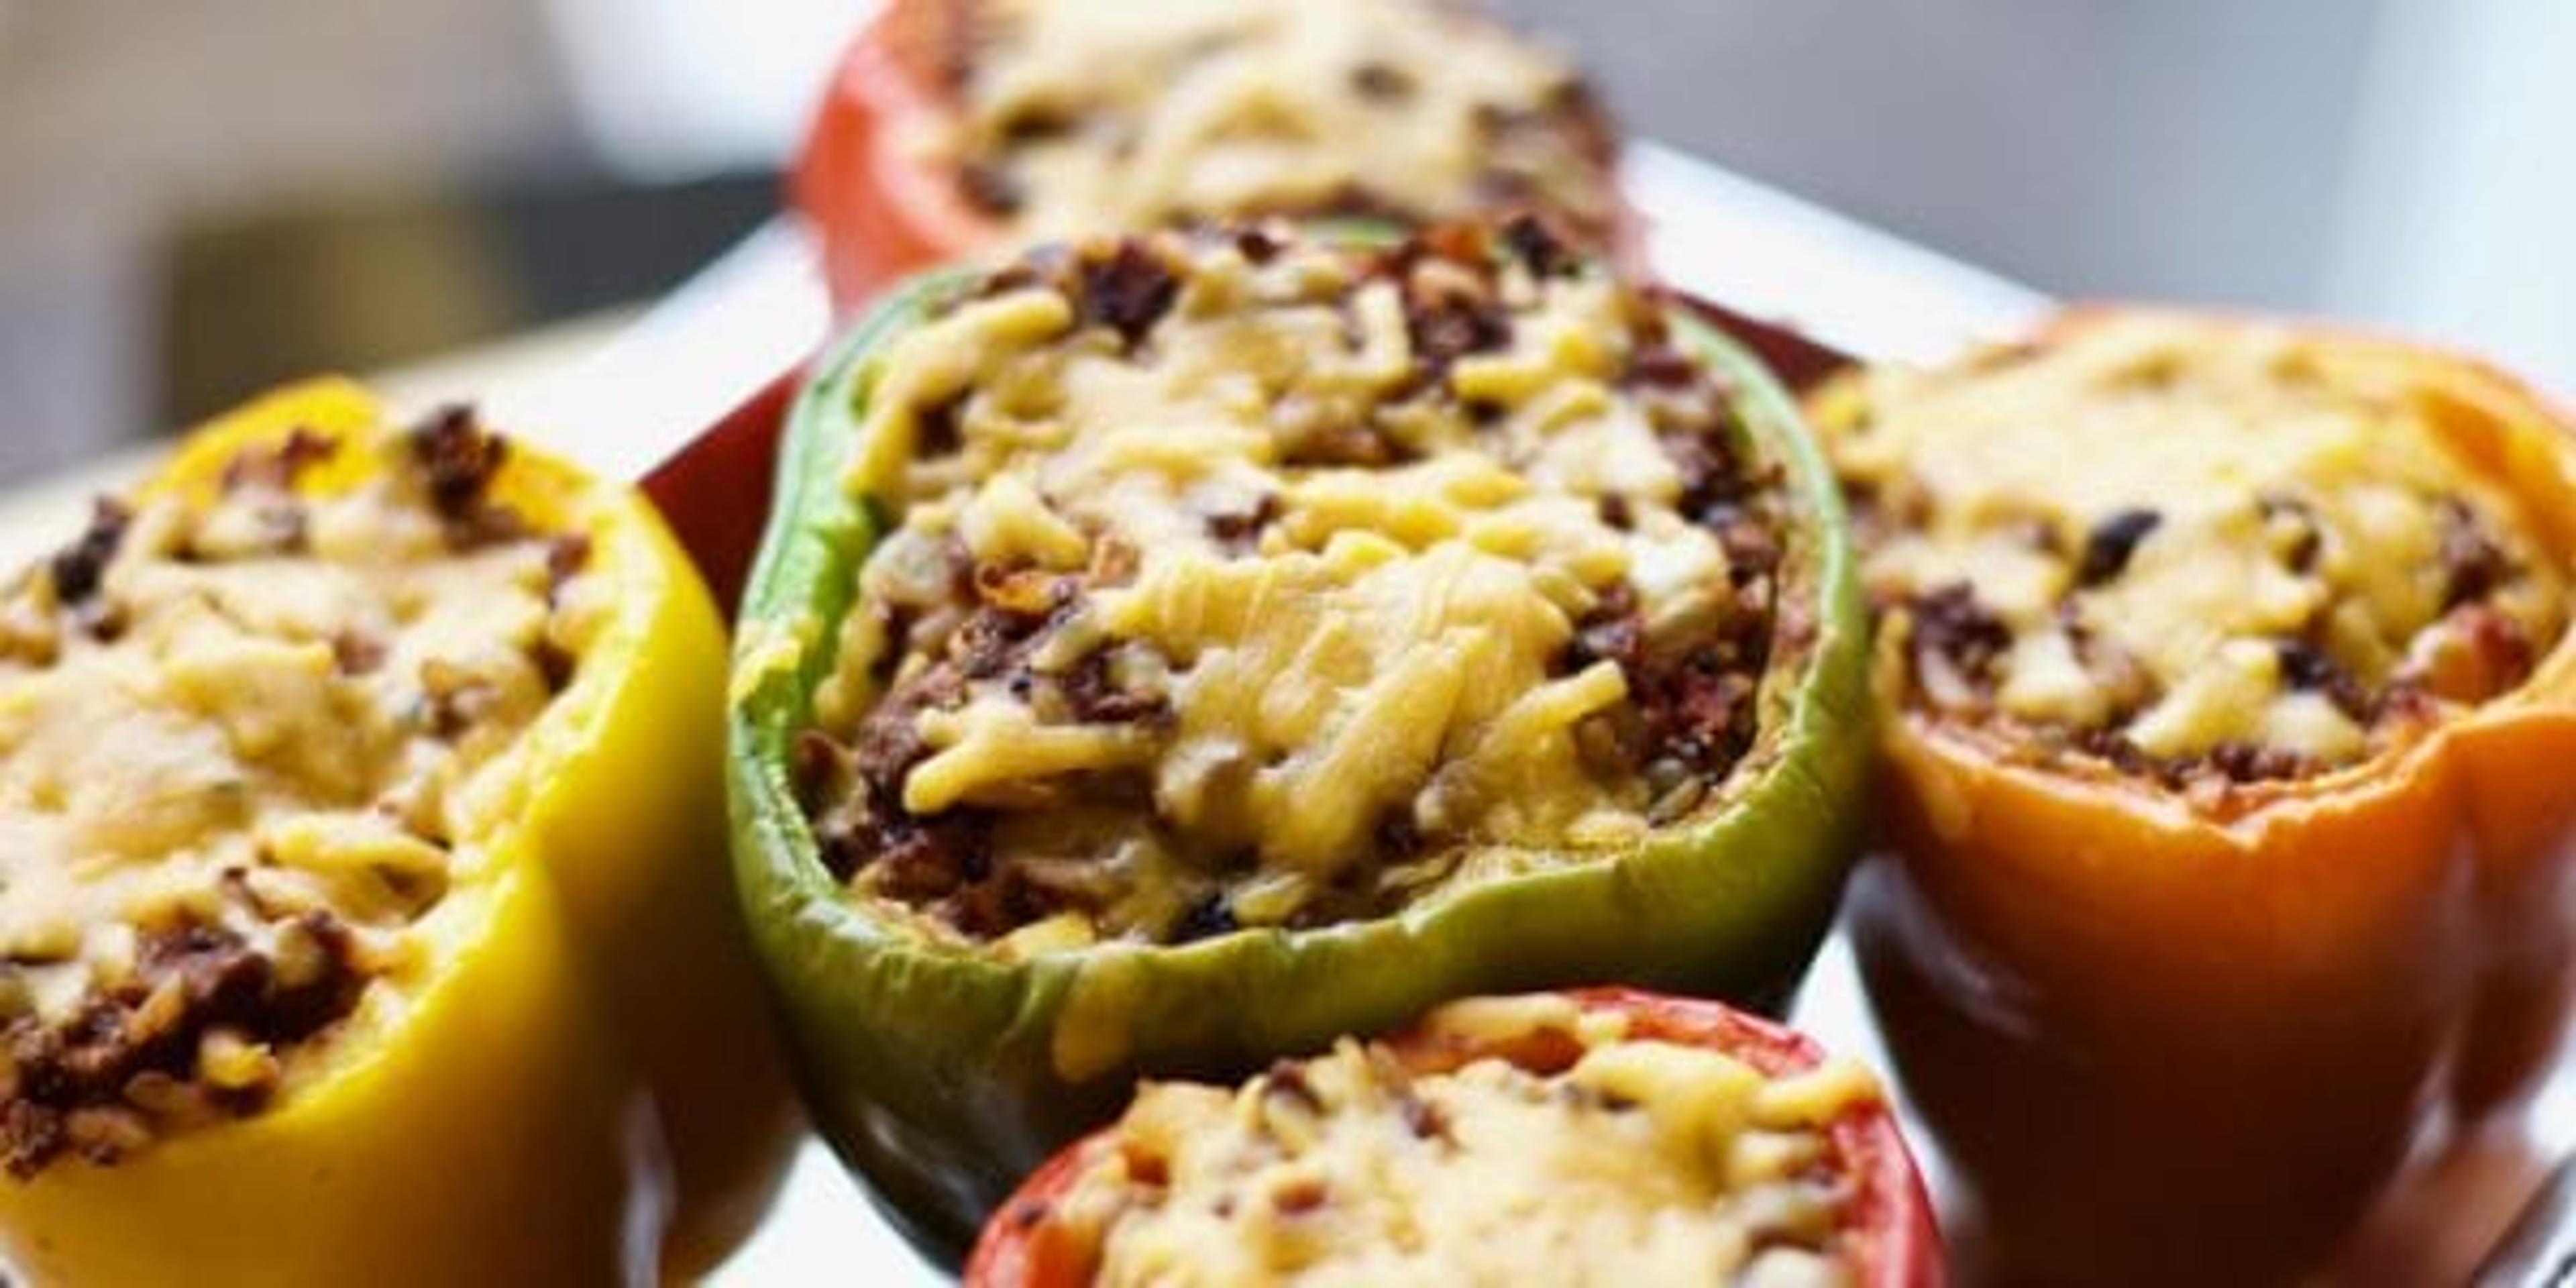 Bell peppers with cheese and stuffing.